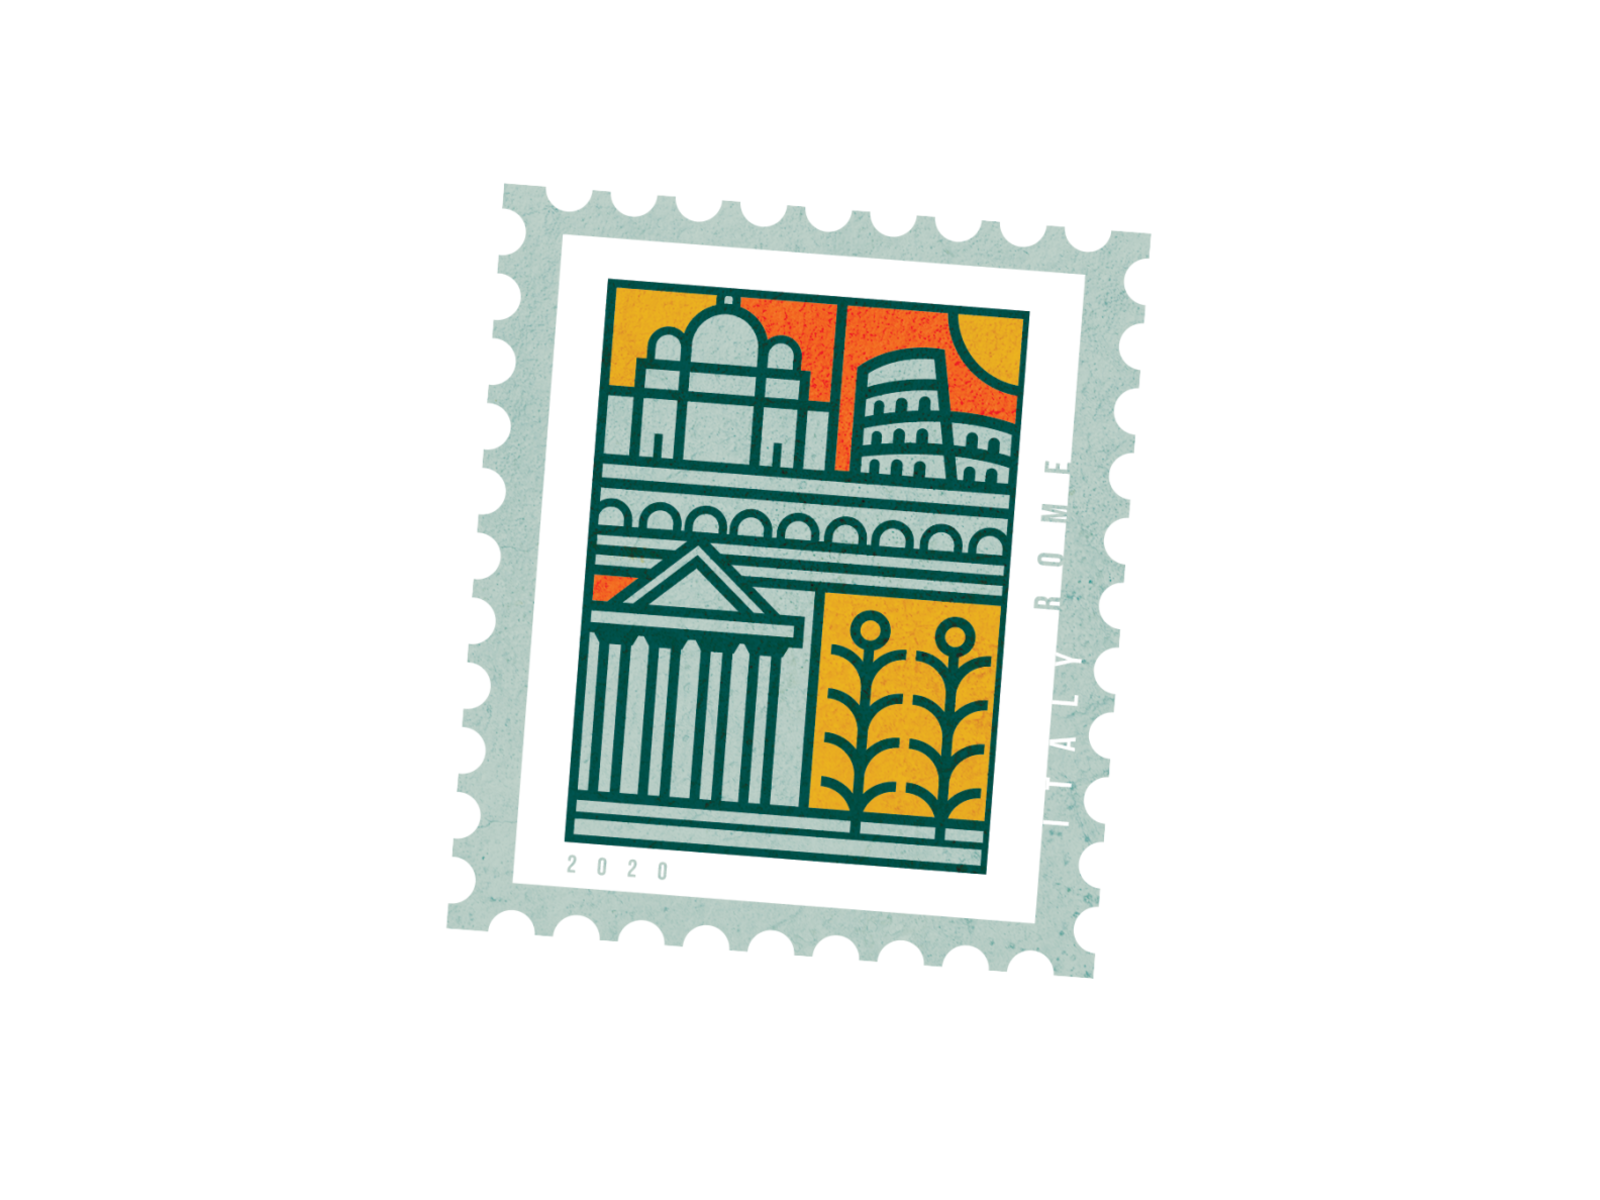 Rome Stamp by Roberto Hernández on Dribbble